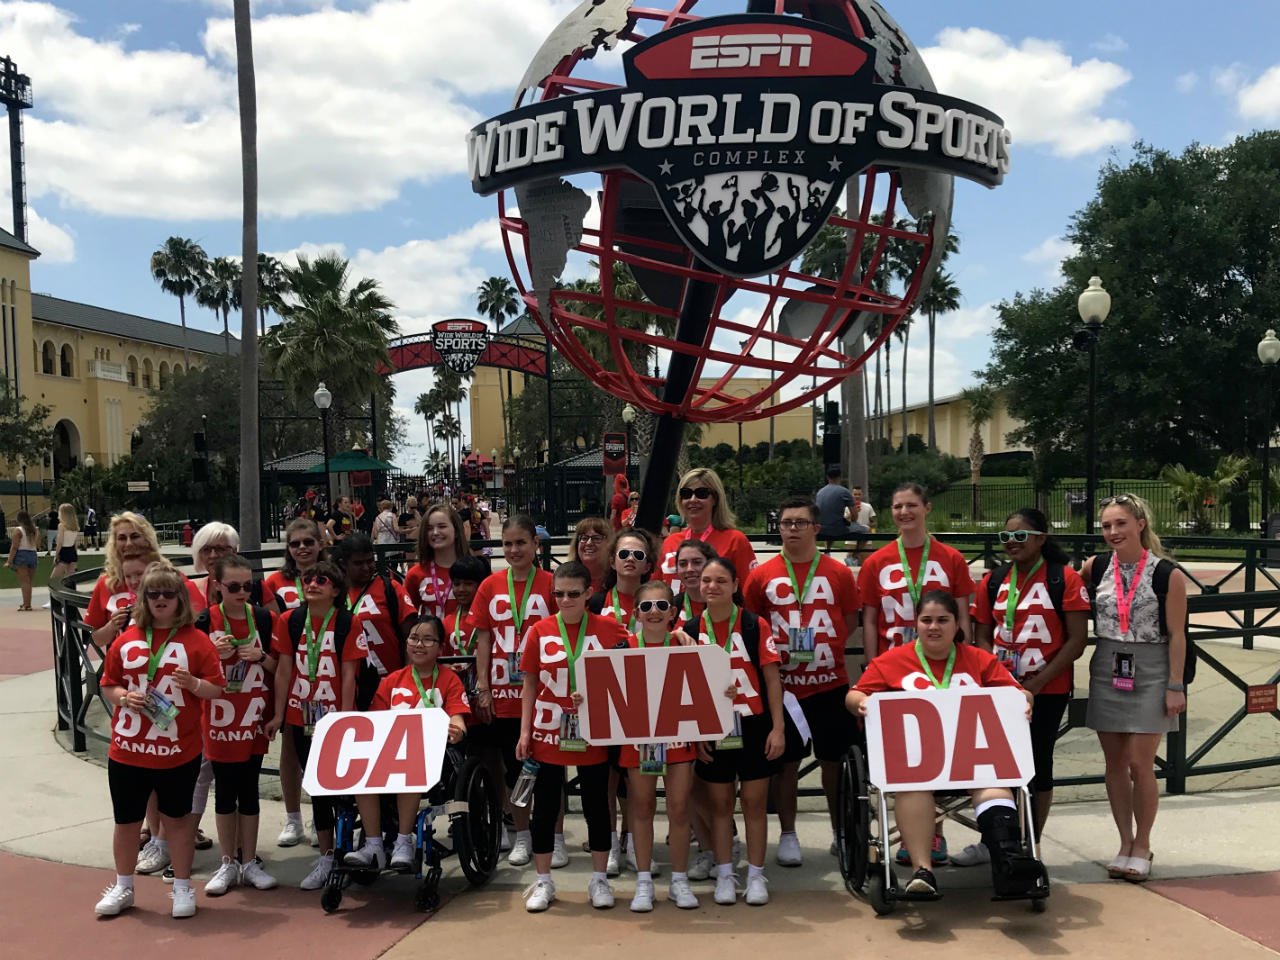 Team Canada Special Abilities arriving at ESPN Wide World of Sports, Disney